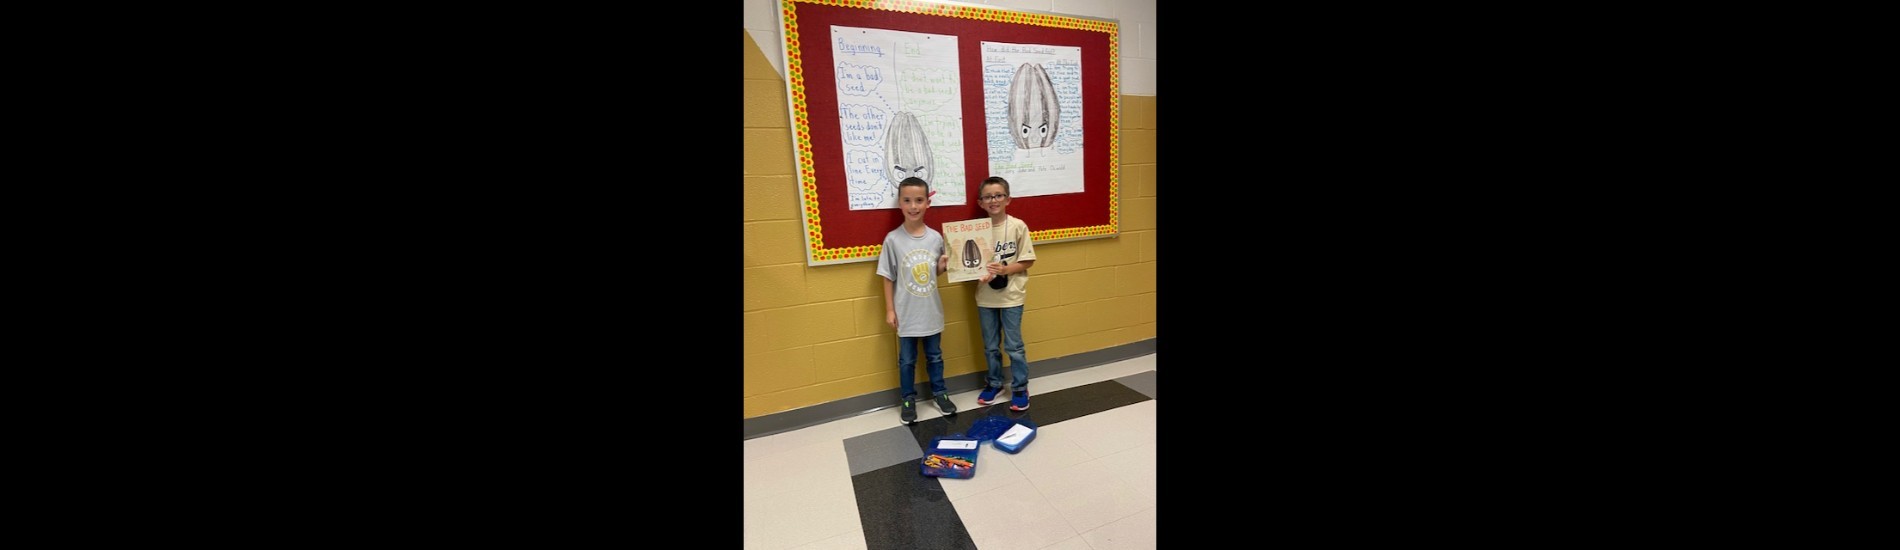 Two K.T. students pose with a book they read in class.